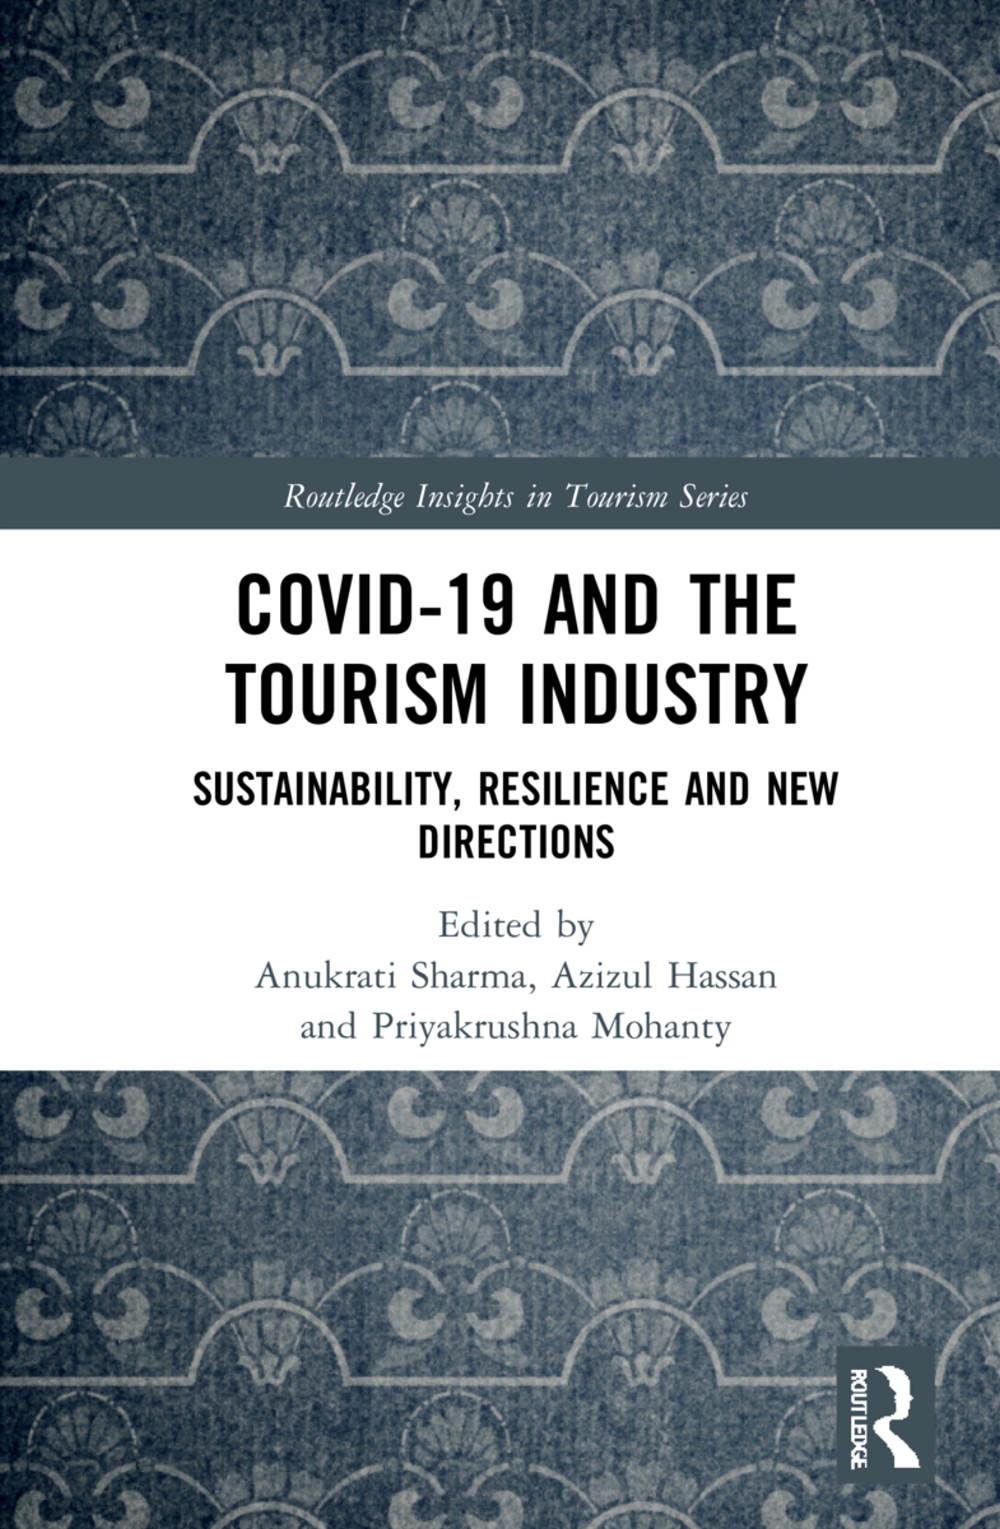 Covid-19 and the Tourism Industry: Sustainability, Resilience and New Directions